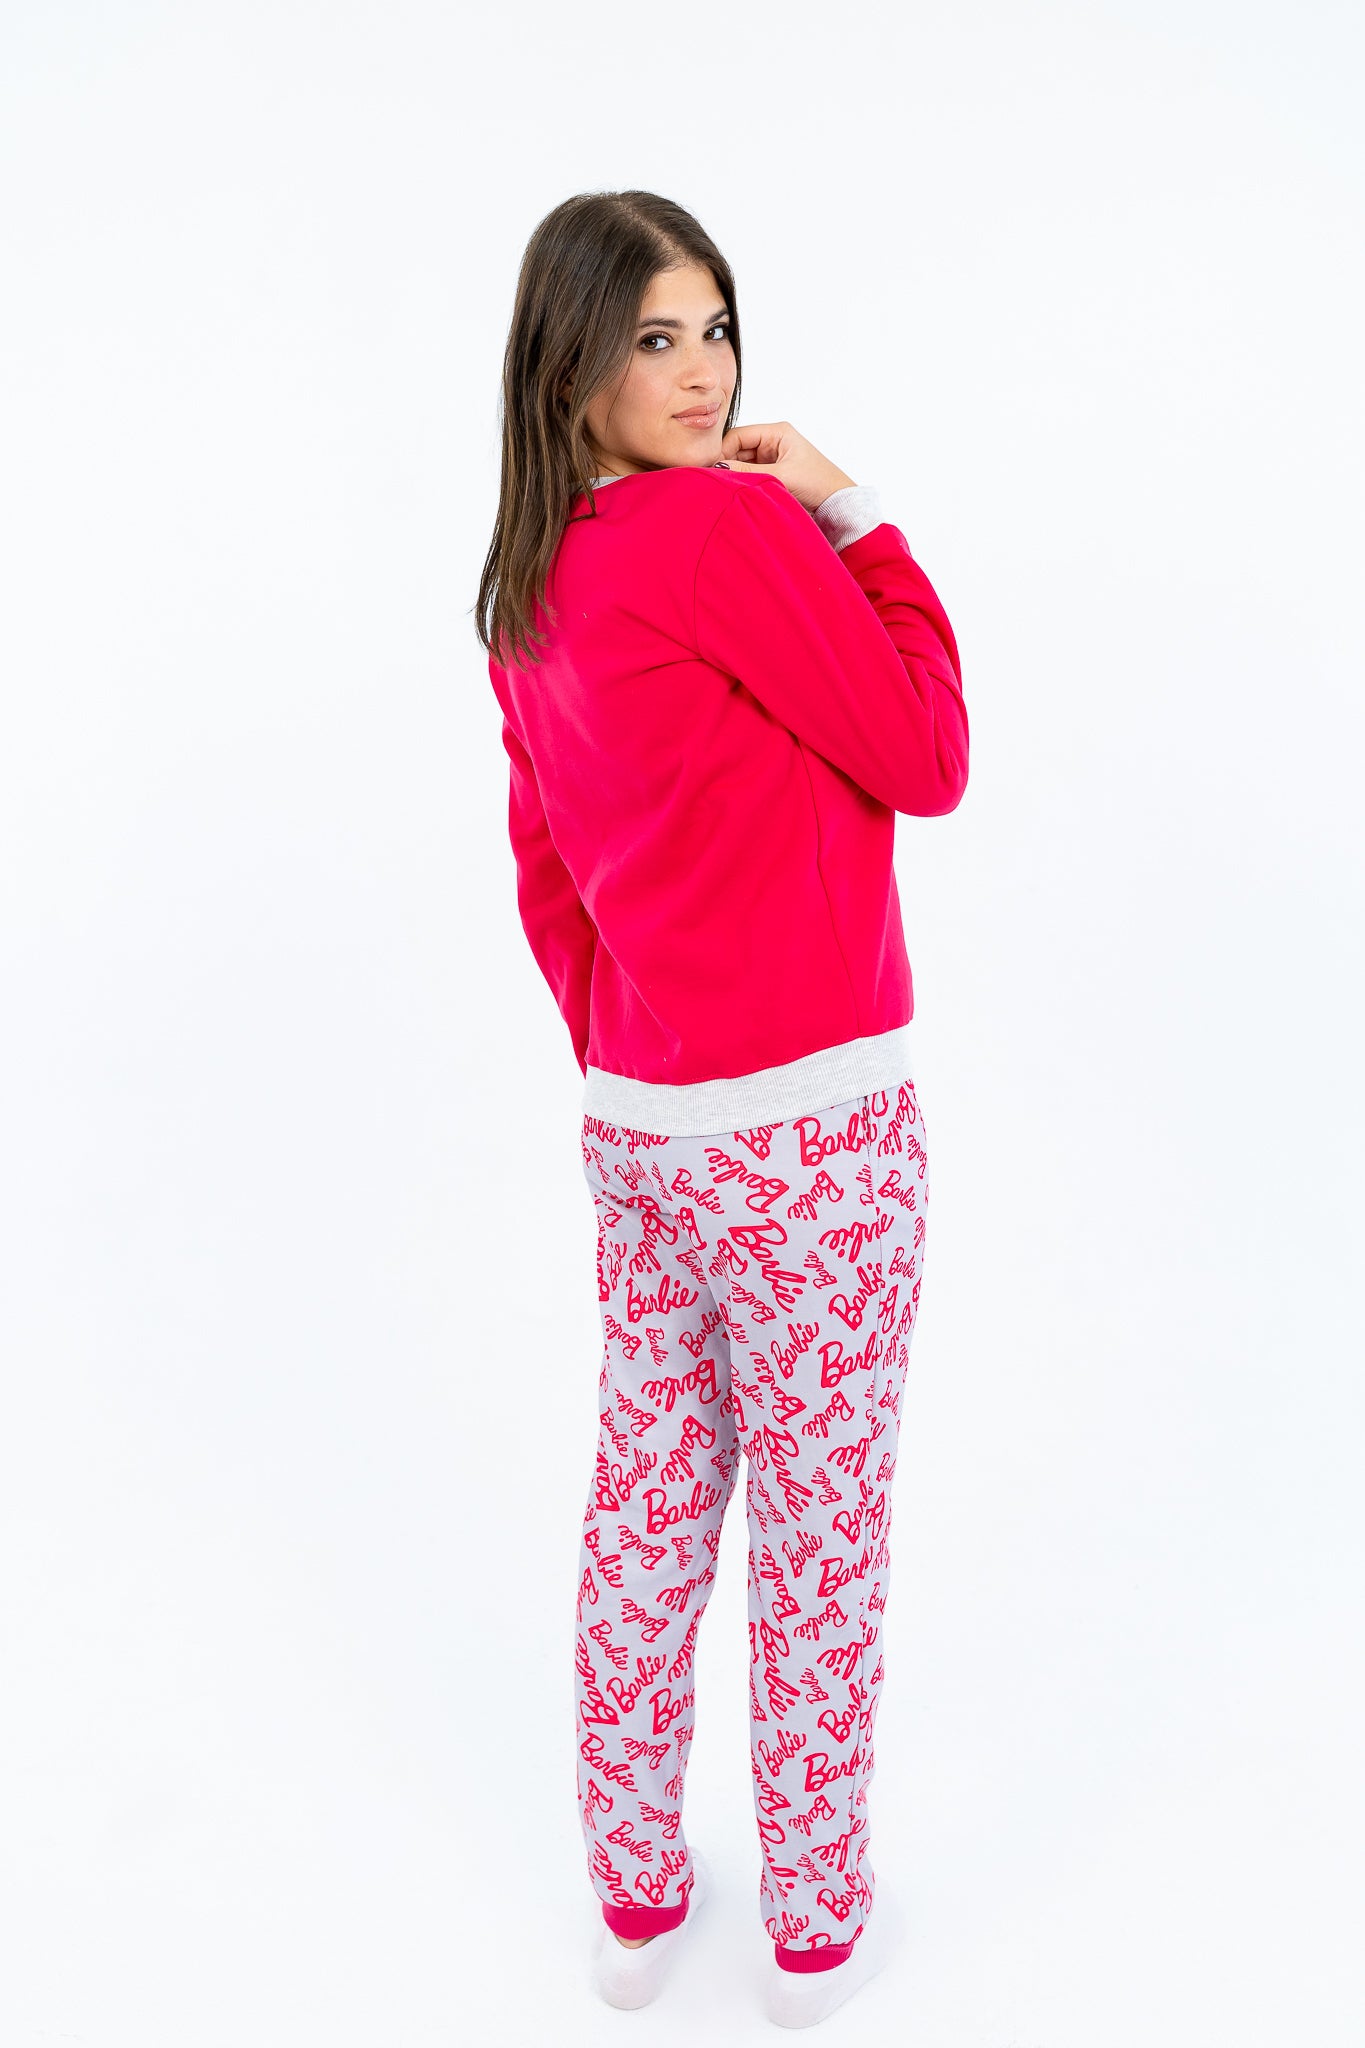 Girl's winter pajamas with barbie lets go party print - Fuchsia